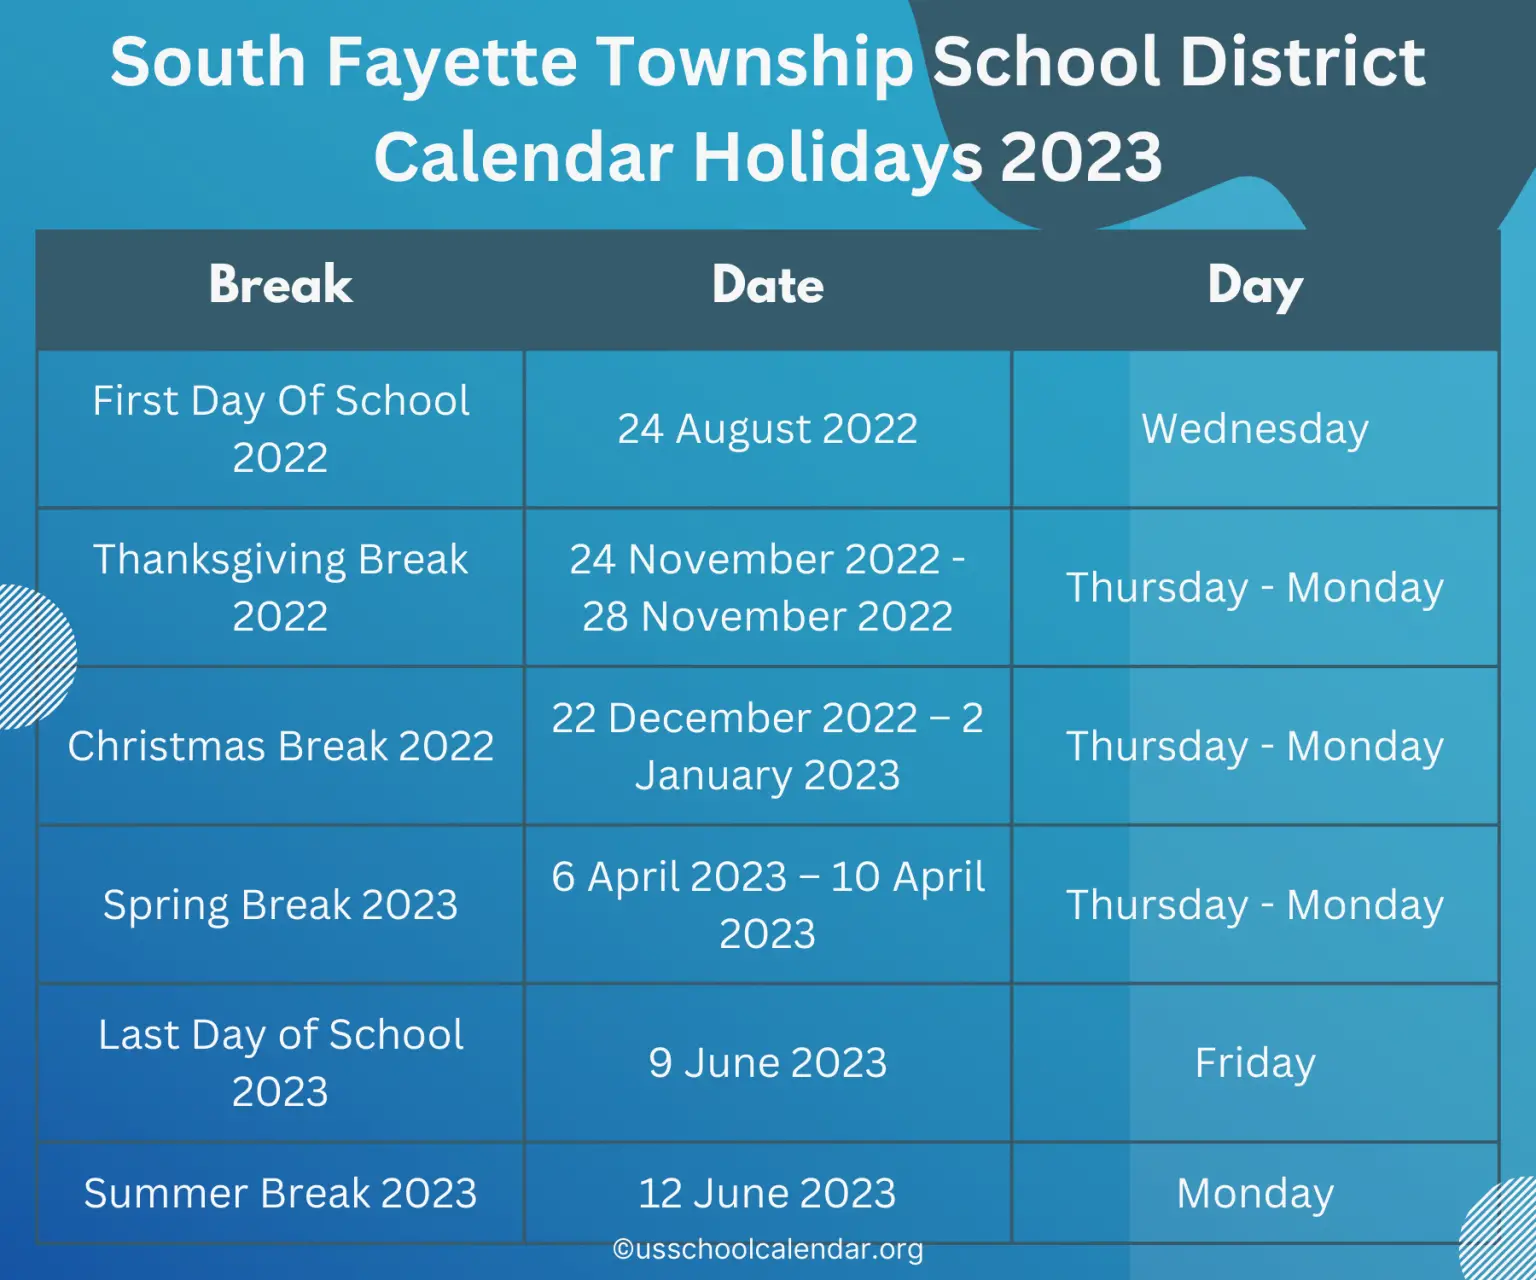 South Fayette Township School District Calendar Holidays 2023